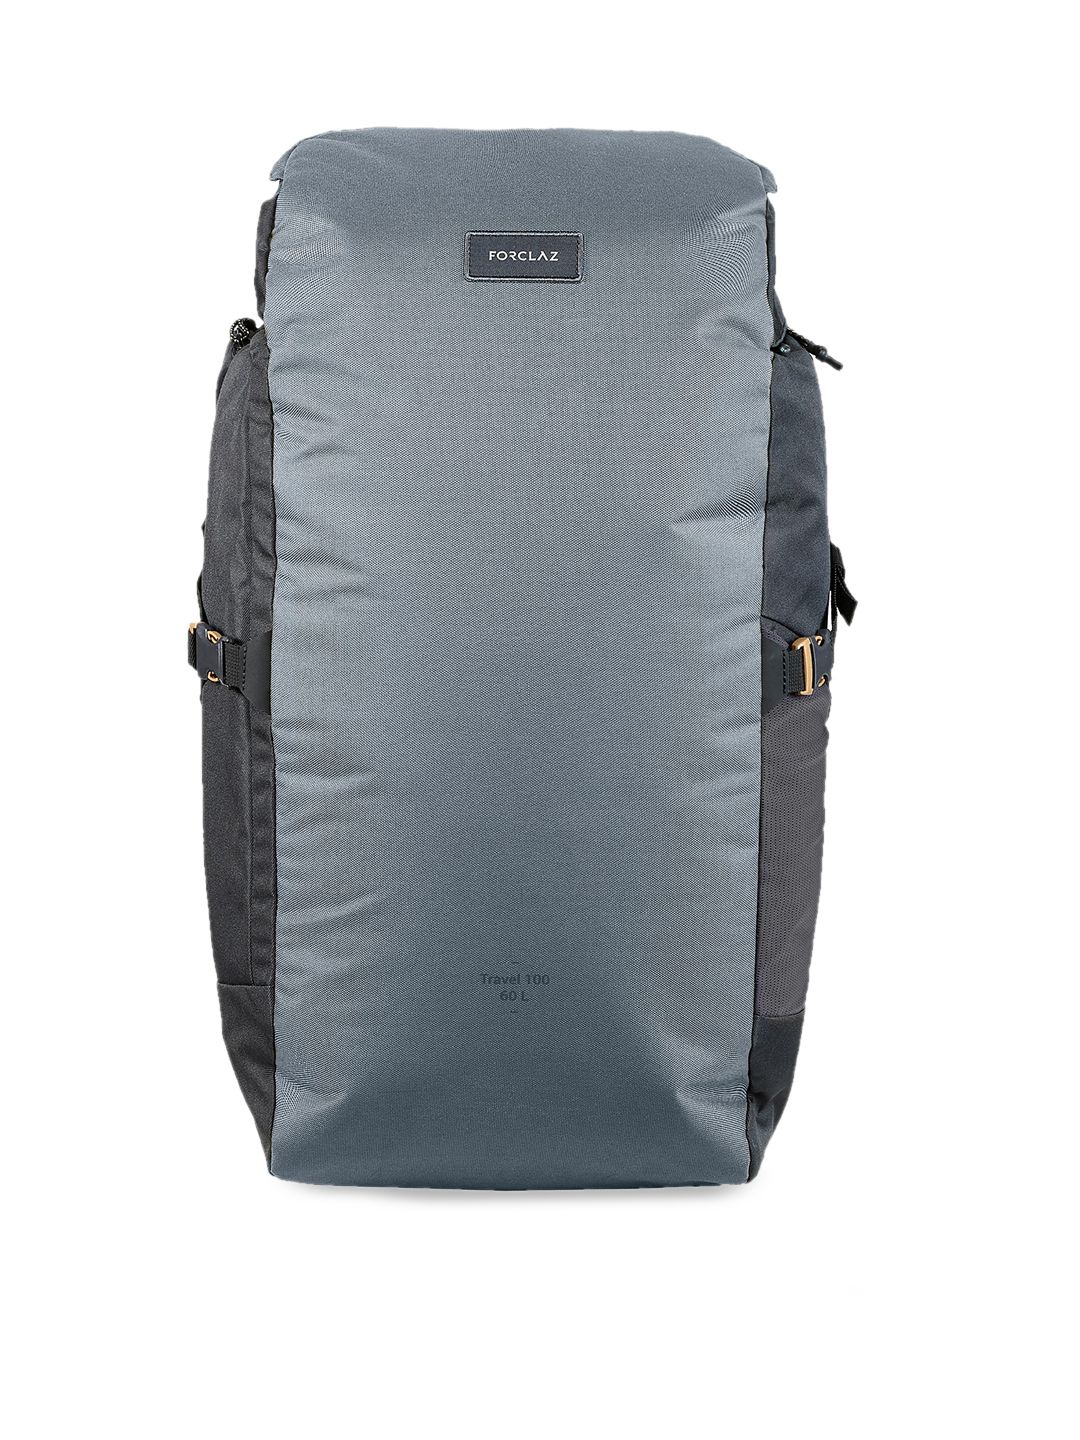 FORCLAZ By Decathlon Unisex Grey & Black Backpacks with Compression Straps Price in India